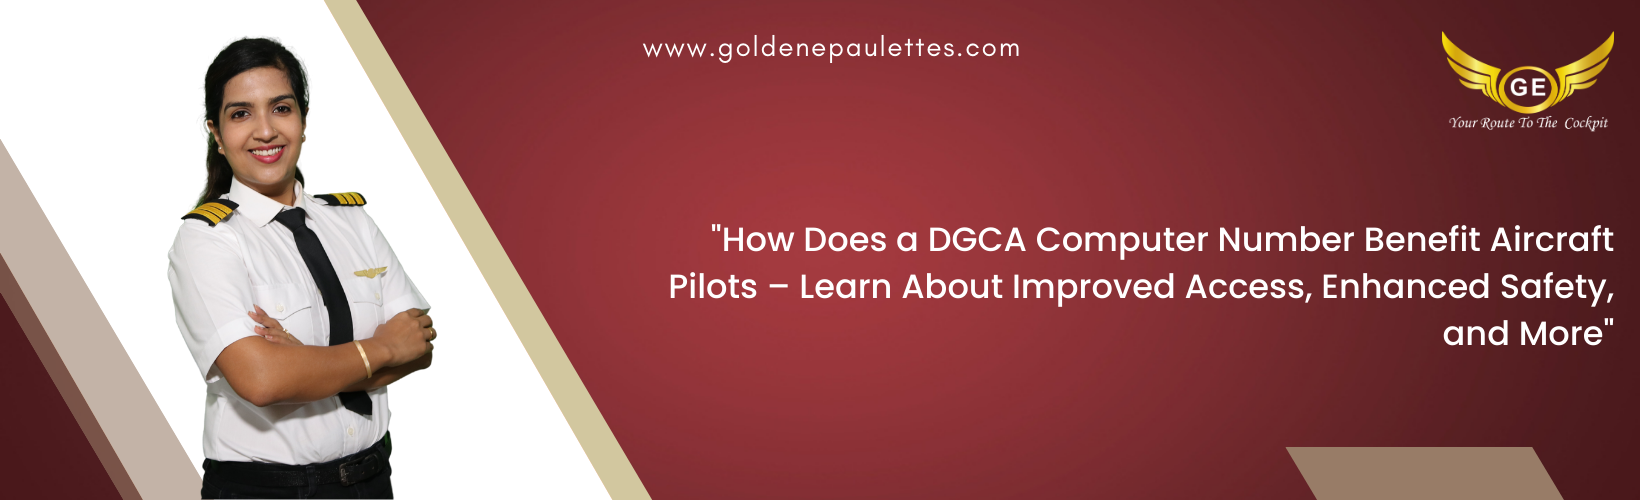 A Guide to Applying for a DGCA Computer Number for Aviation Enthusiasts